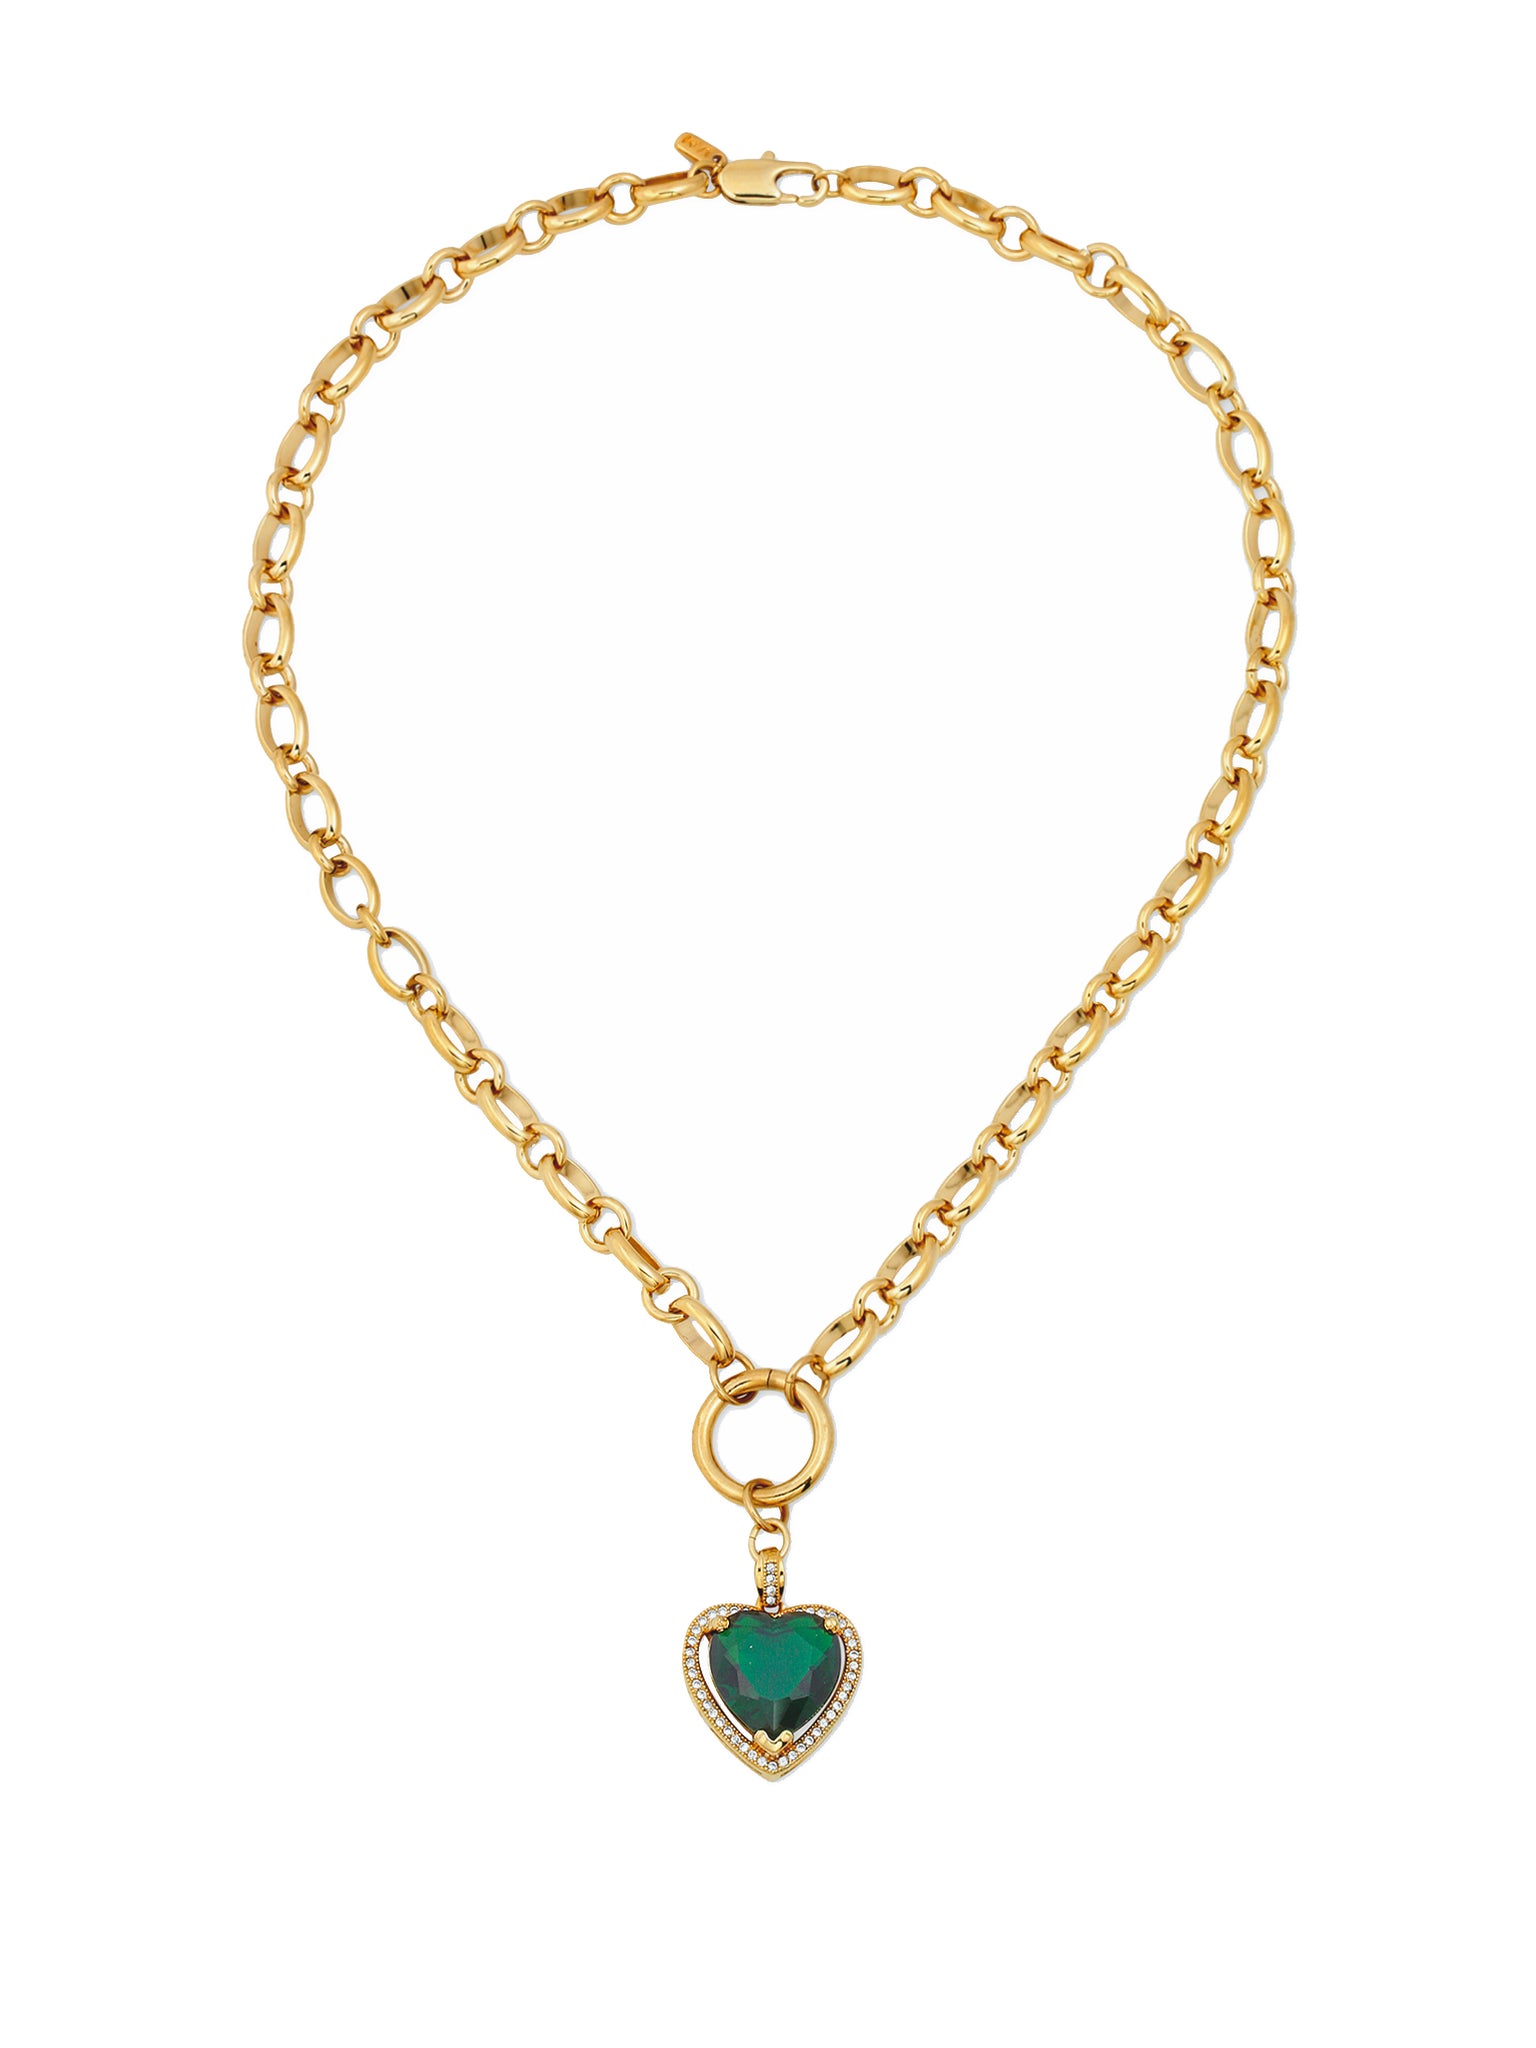 The Julia Heart Necklace